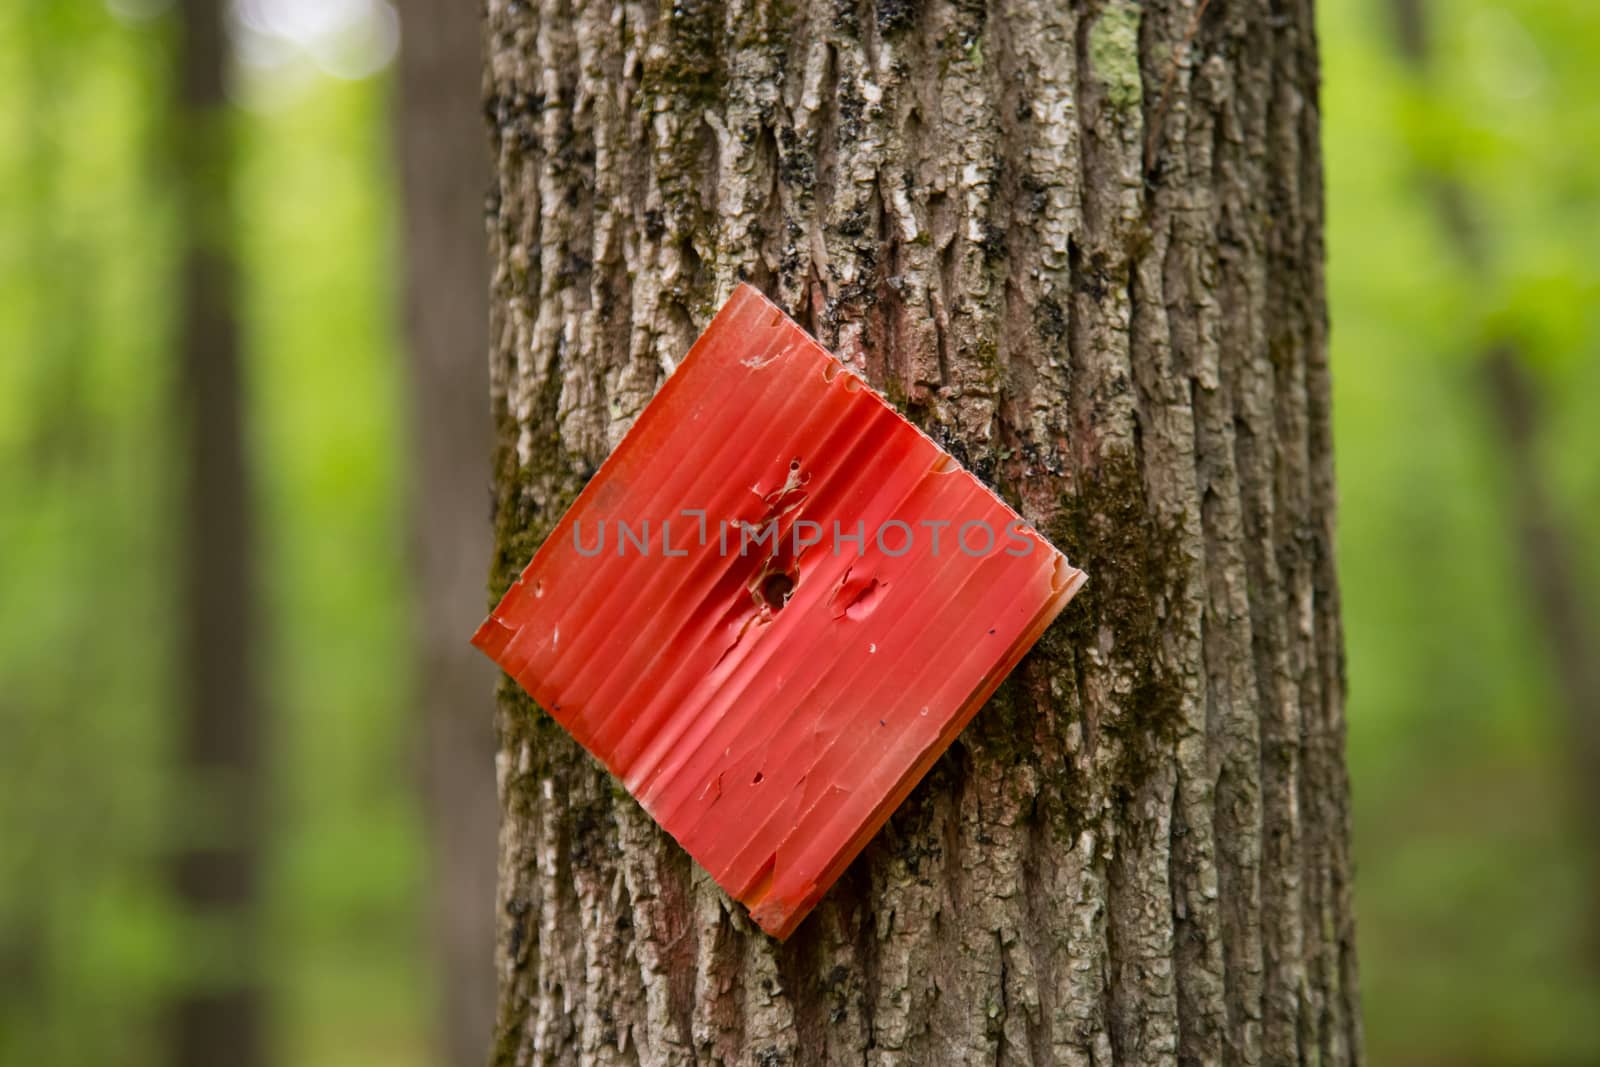 A red square trail marker is nailed to the rough trunk of a tree along a hiking trail in a forest.